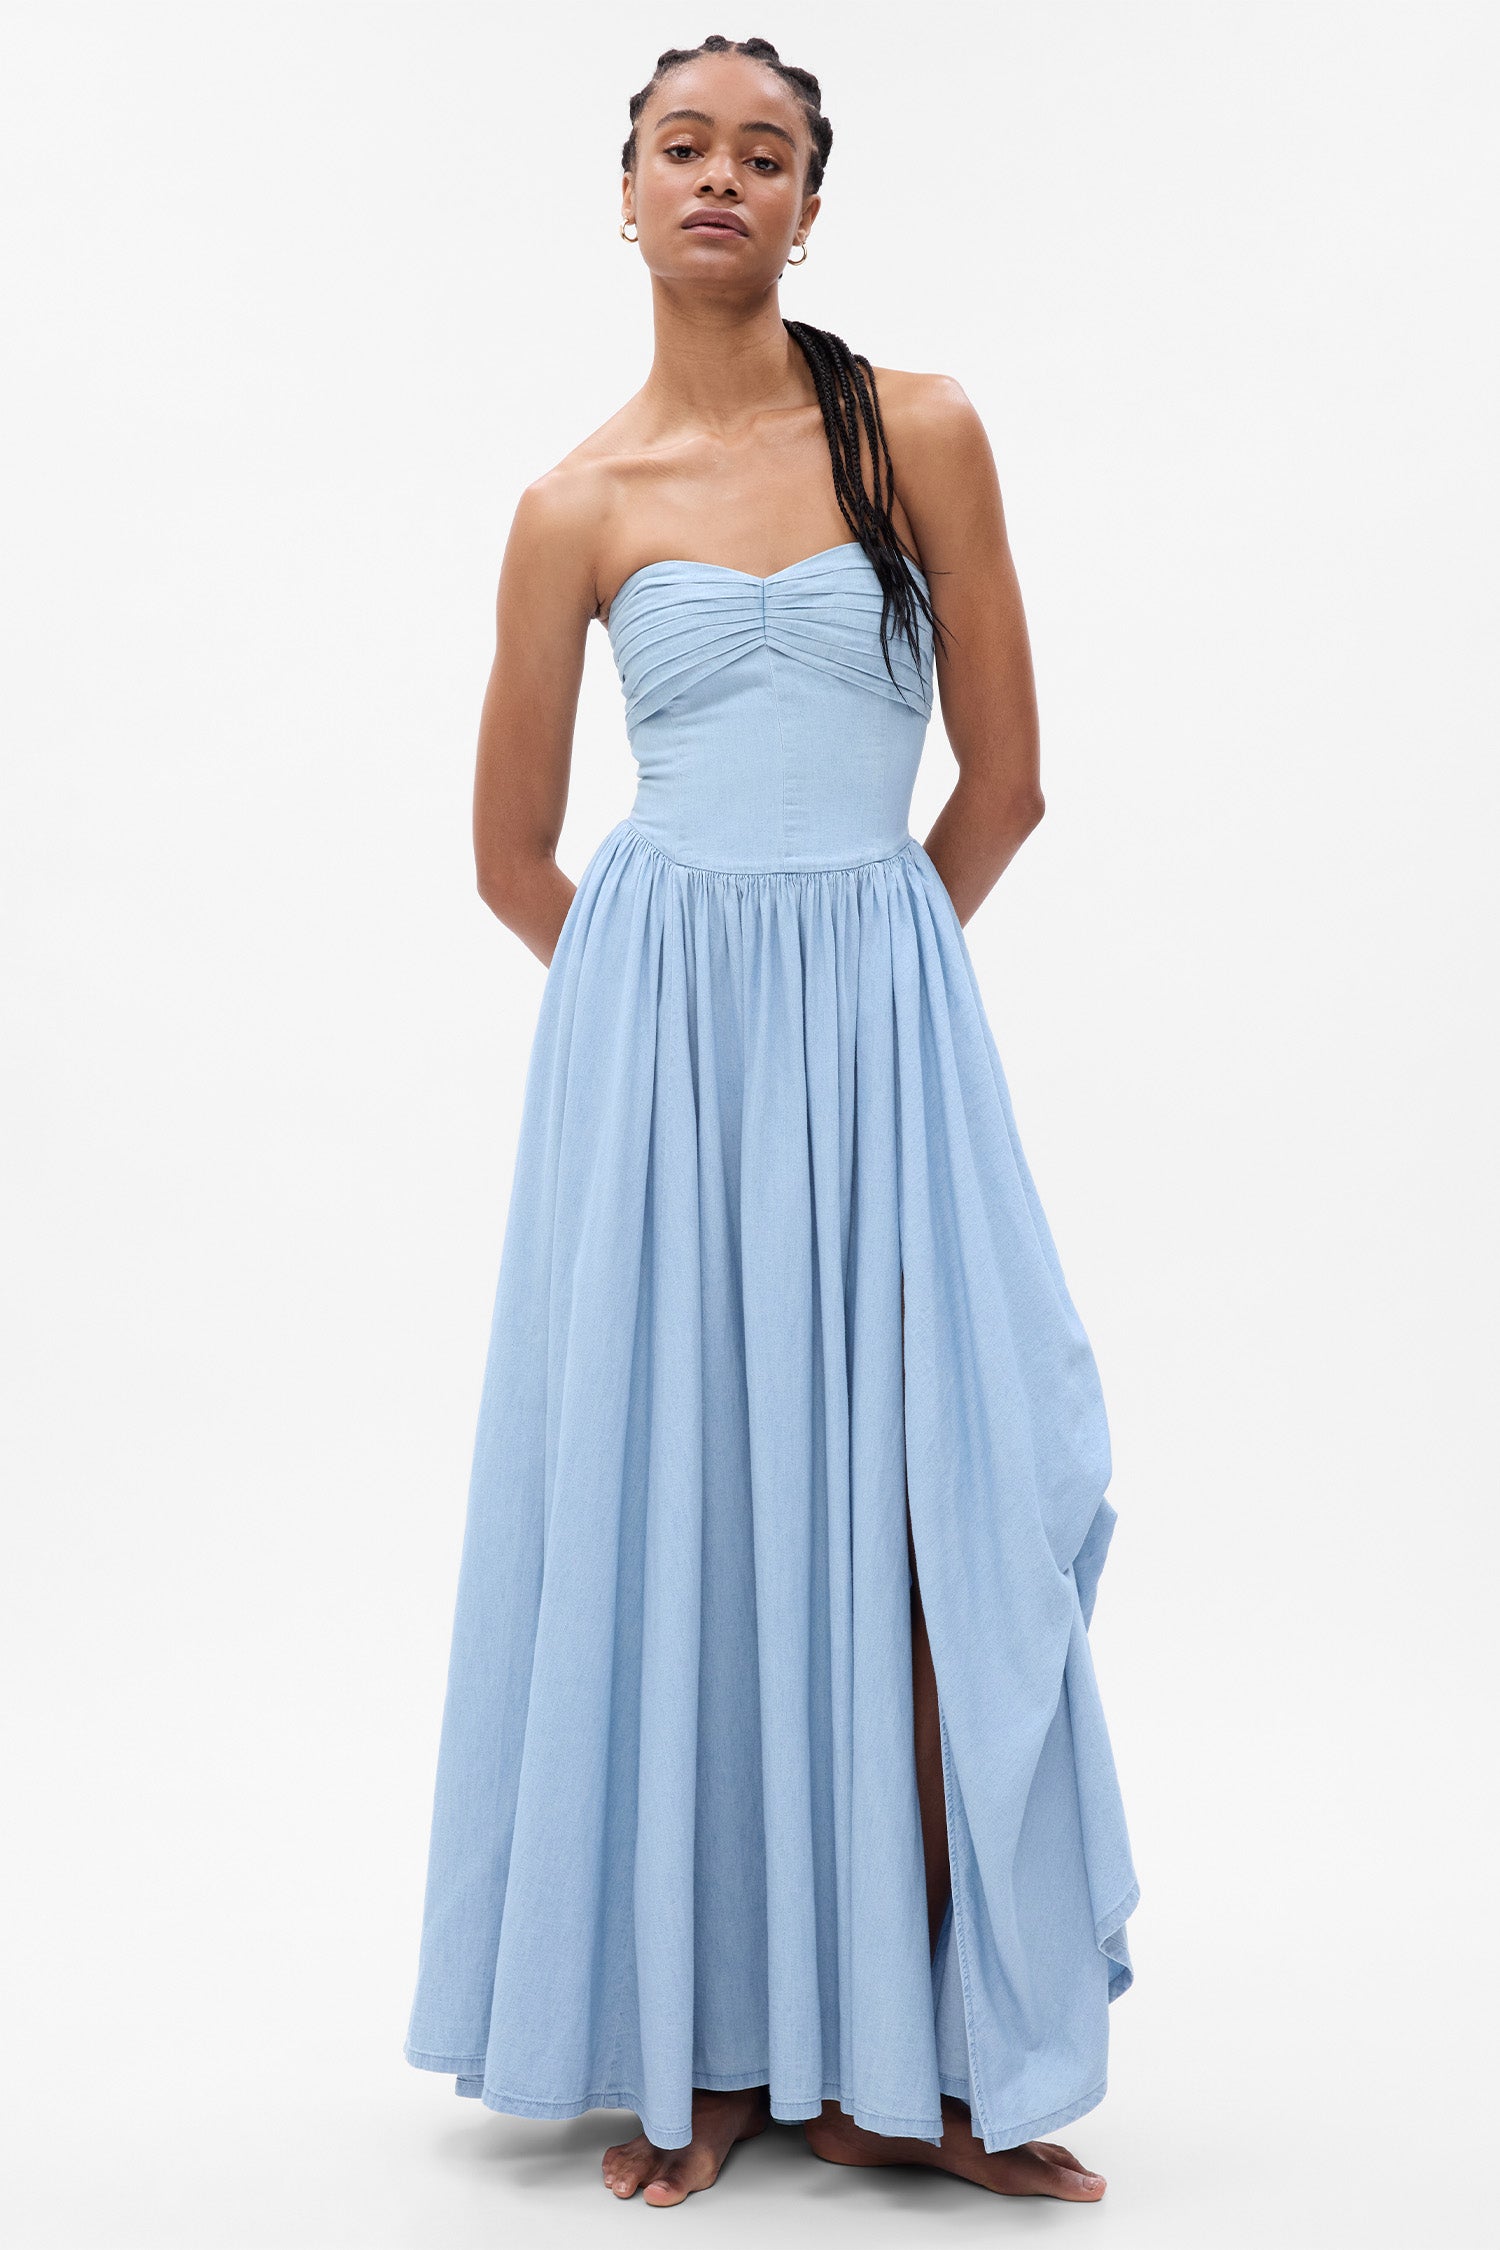 Model wearing blue denim strapless maxi dress with corset top and tiered skirt